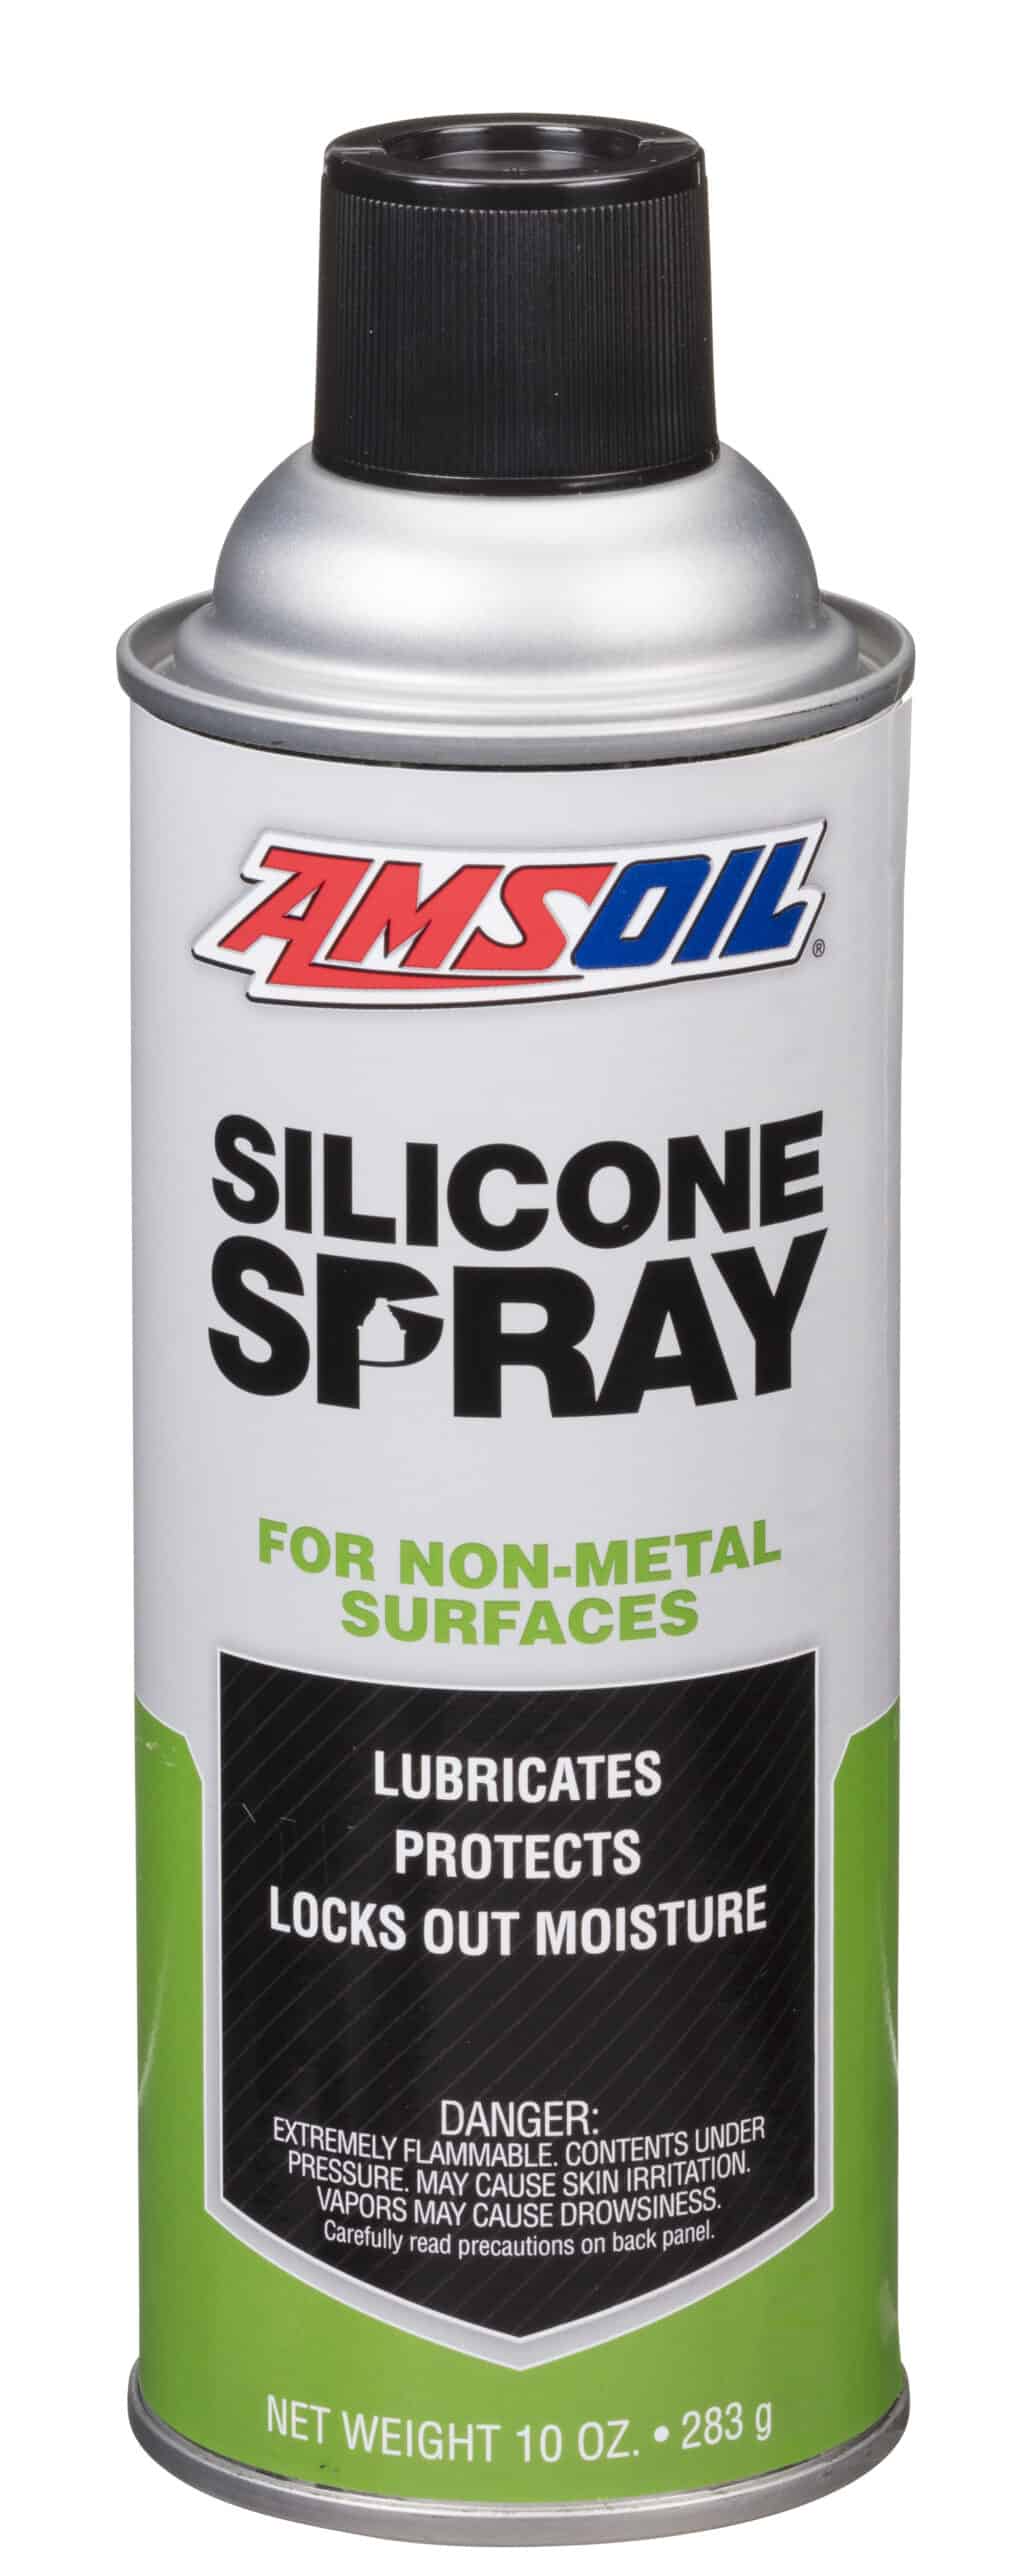 A can of AMSOIL Silicon Spray (ALS), designed to protect with a dry lubricating film ideal for surfaces that may be damaged by conventional lubricants.